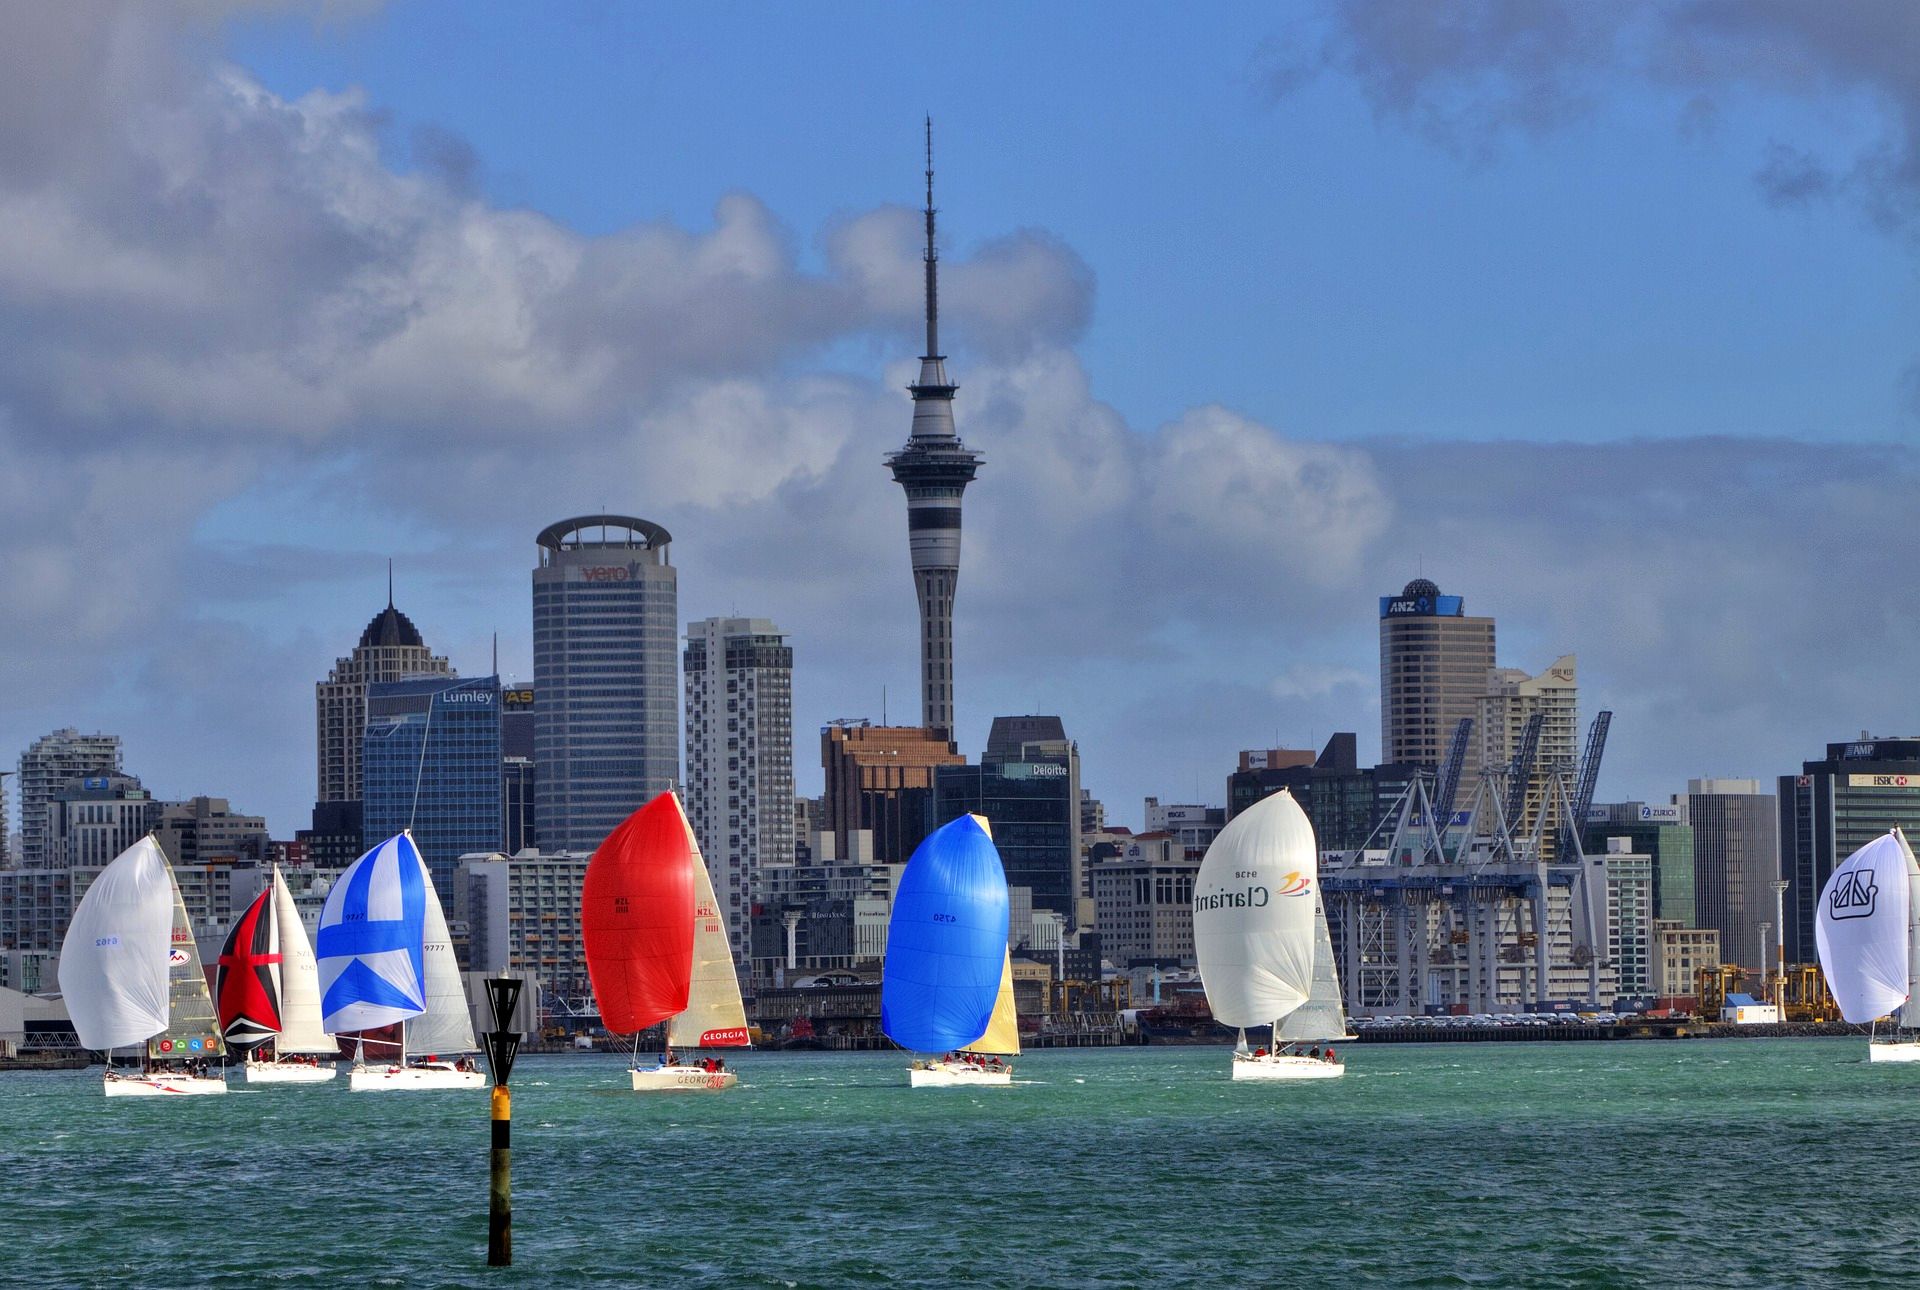 Auckland, New Zealand, the City of Sails